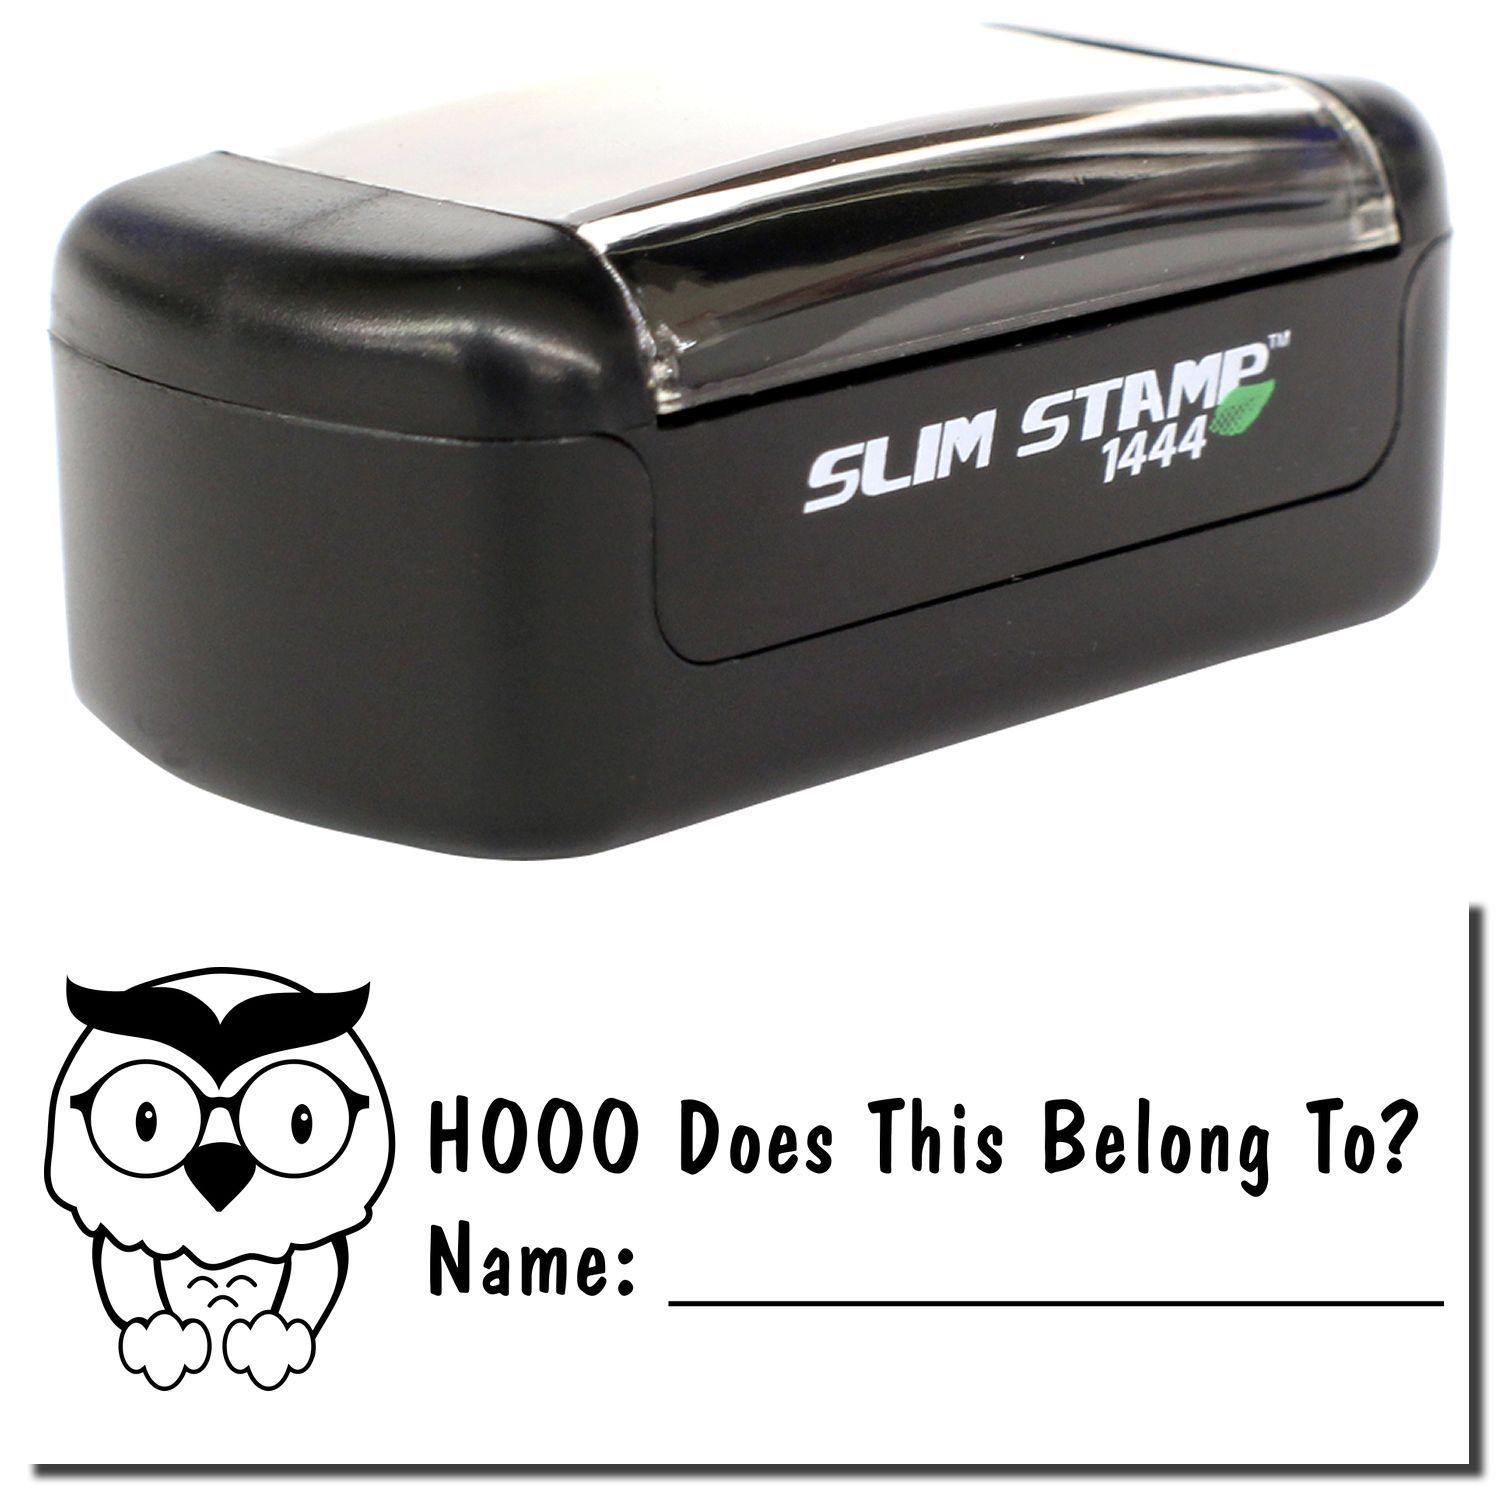 A stock office pre-inked stamp with a stamped image showing how the text "HOOO Does This Belong to?" with an owl image on the left side is displayed after stamping.